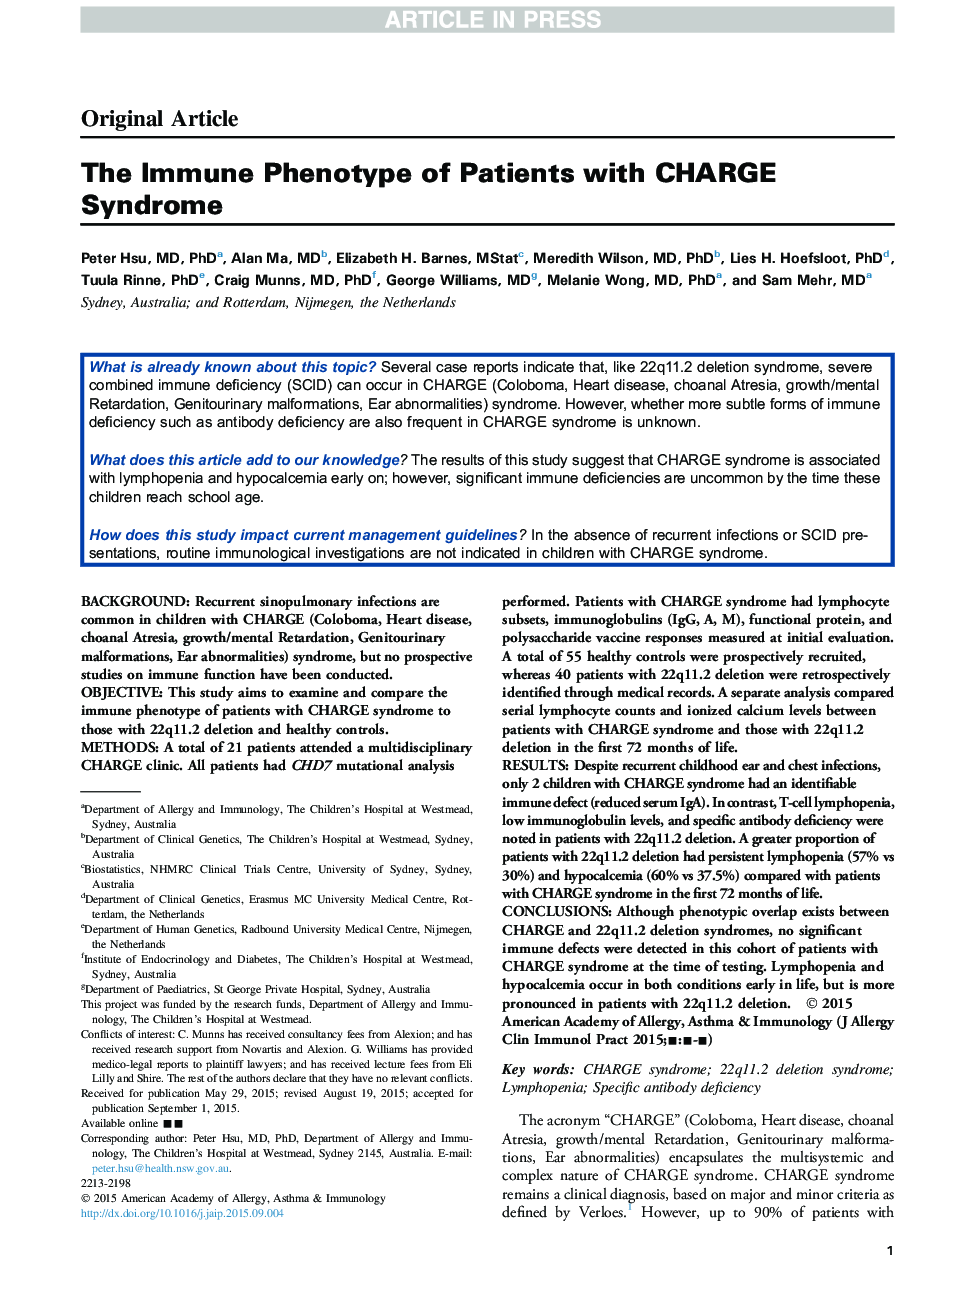 The Immune Phenotype of Patients with CHARGE Syndrome